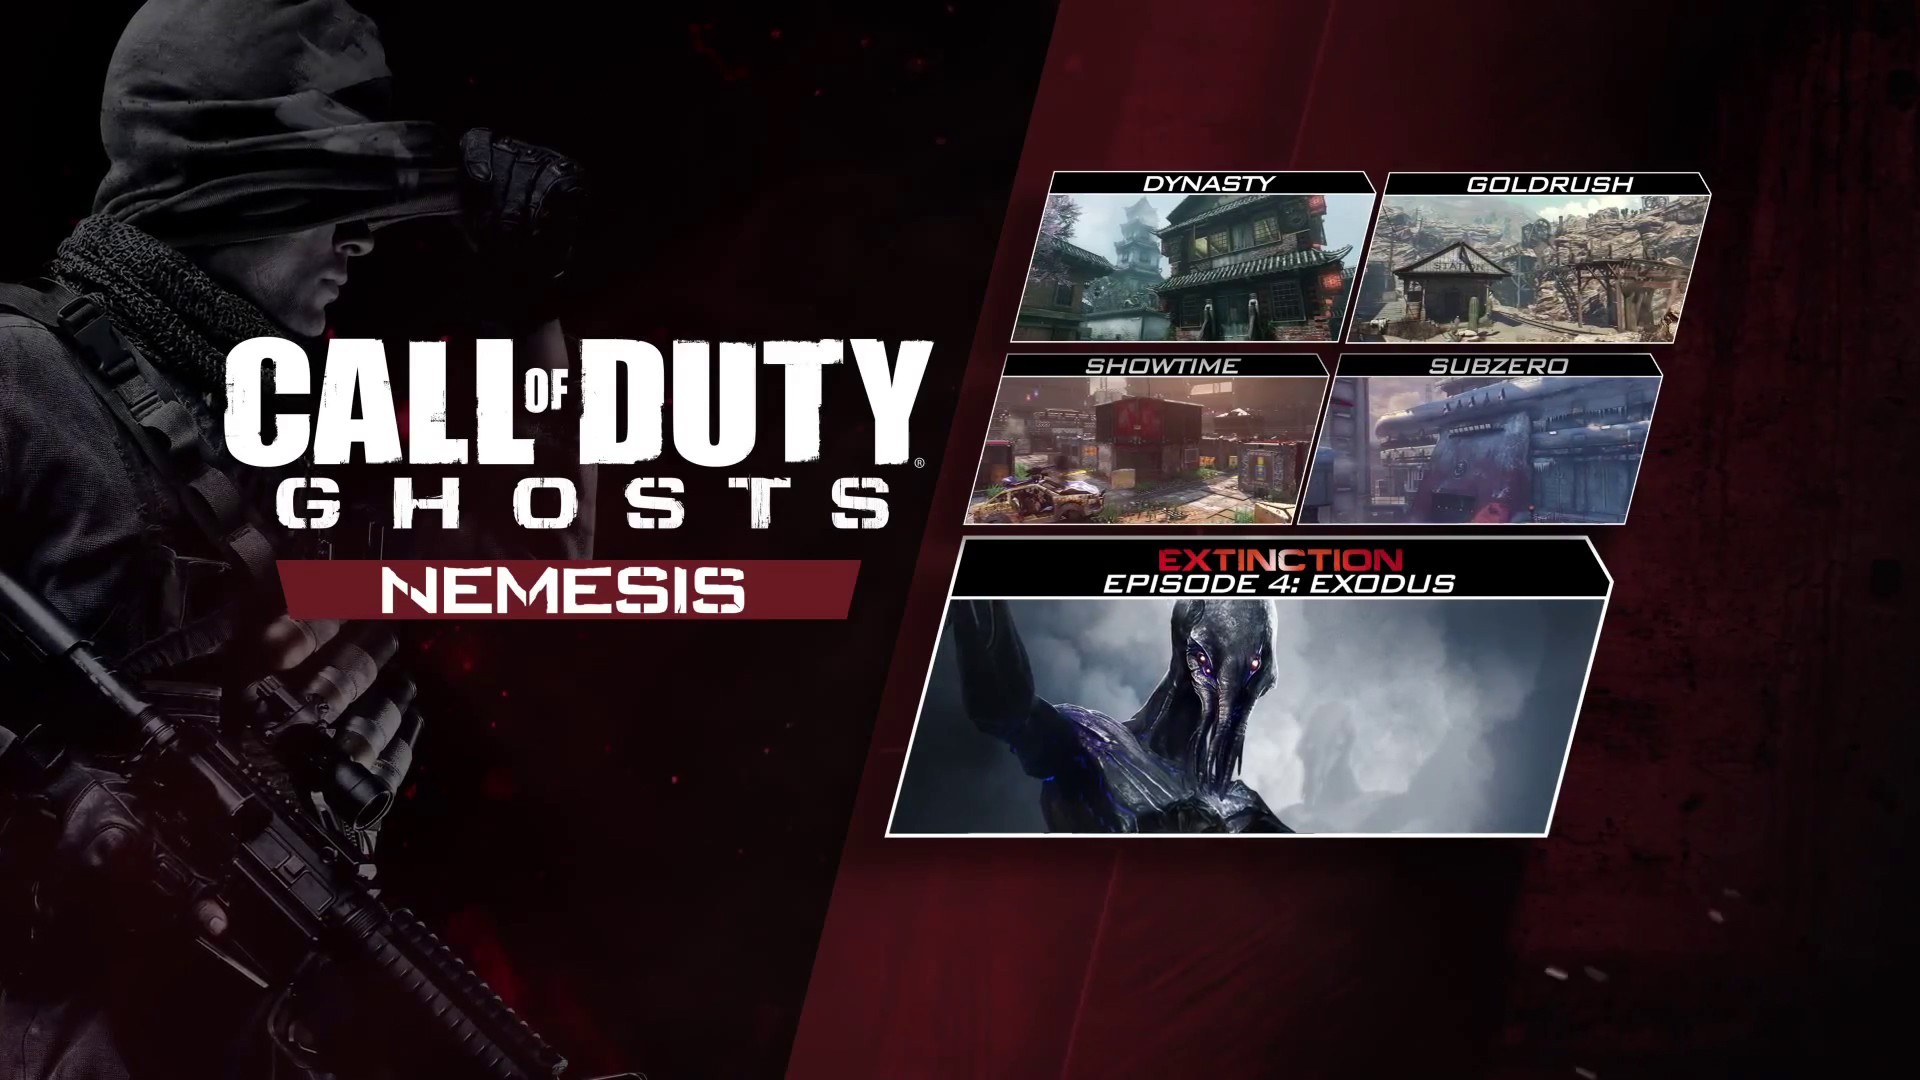 Call Of Duty: Ghost  Call of duty black, Call of duty zombies, Call of duty